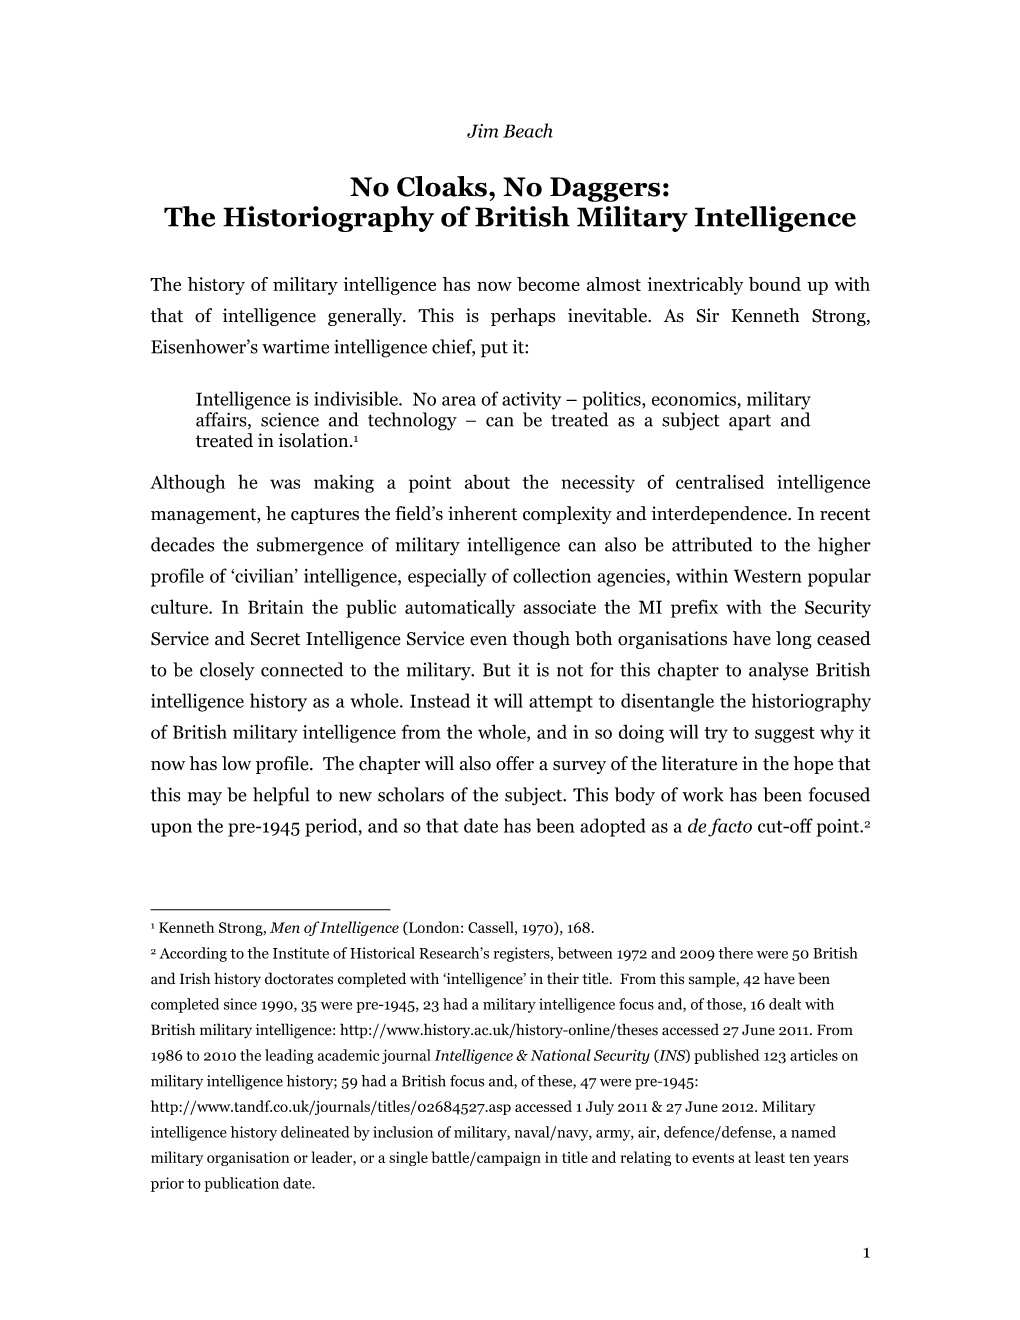 The Historiography of British Military Intelligence